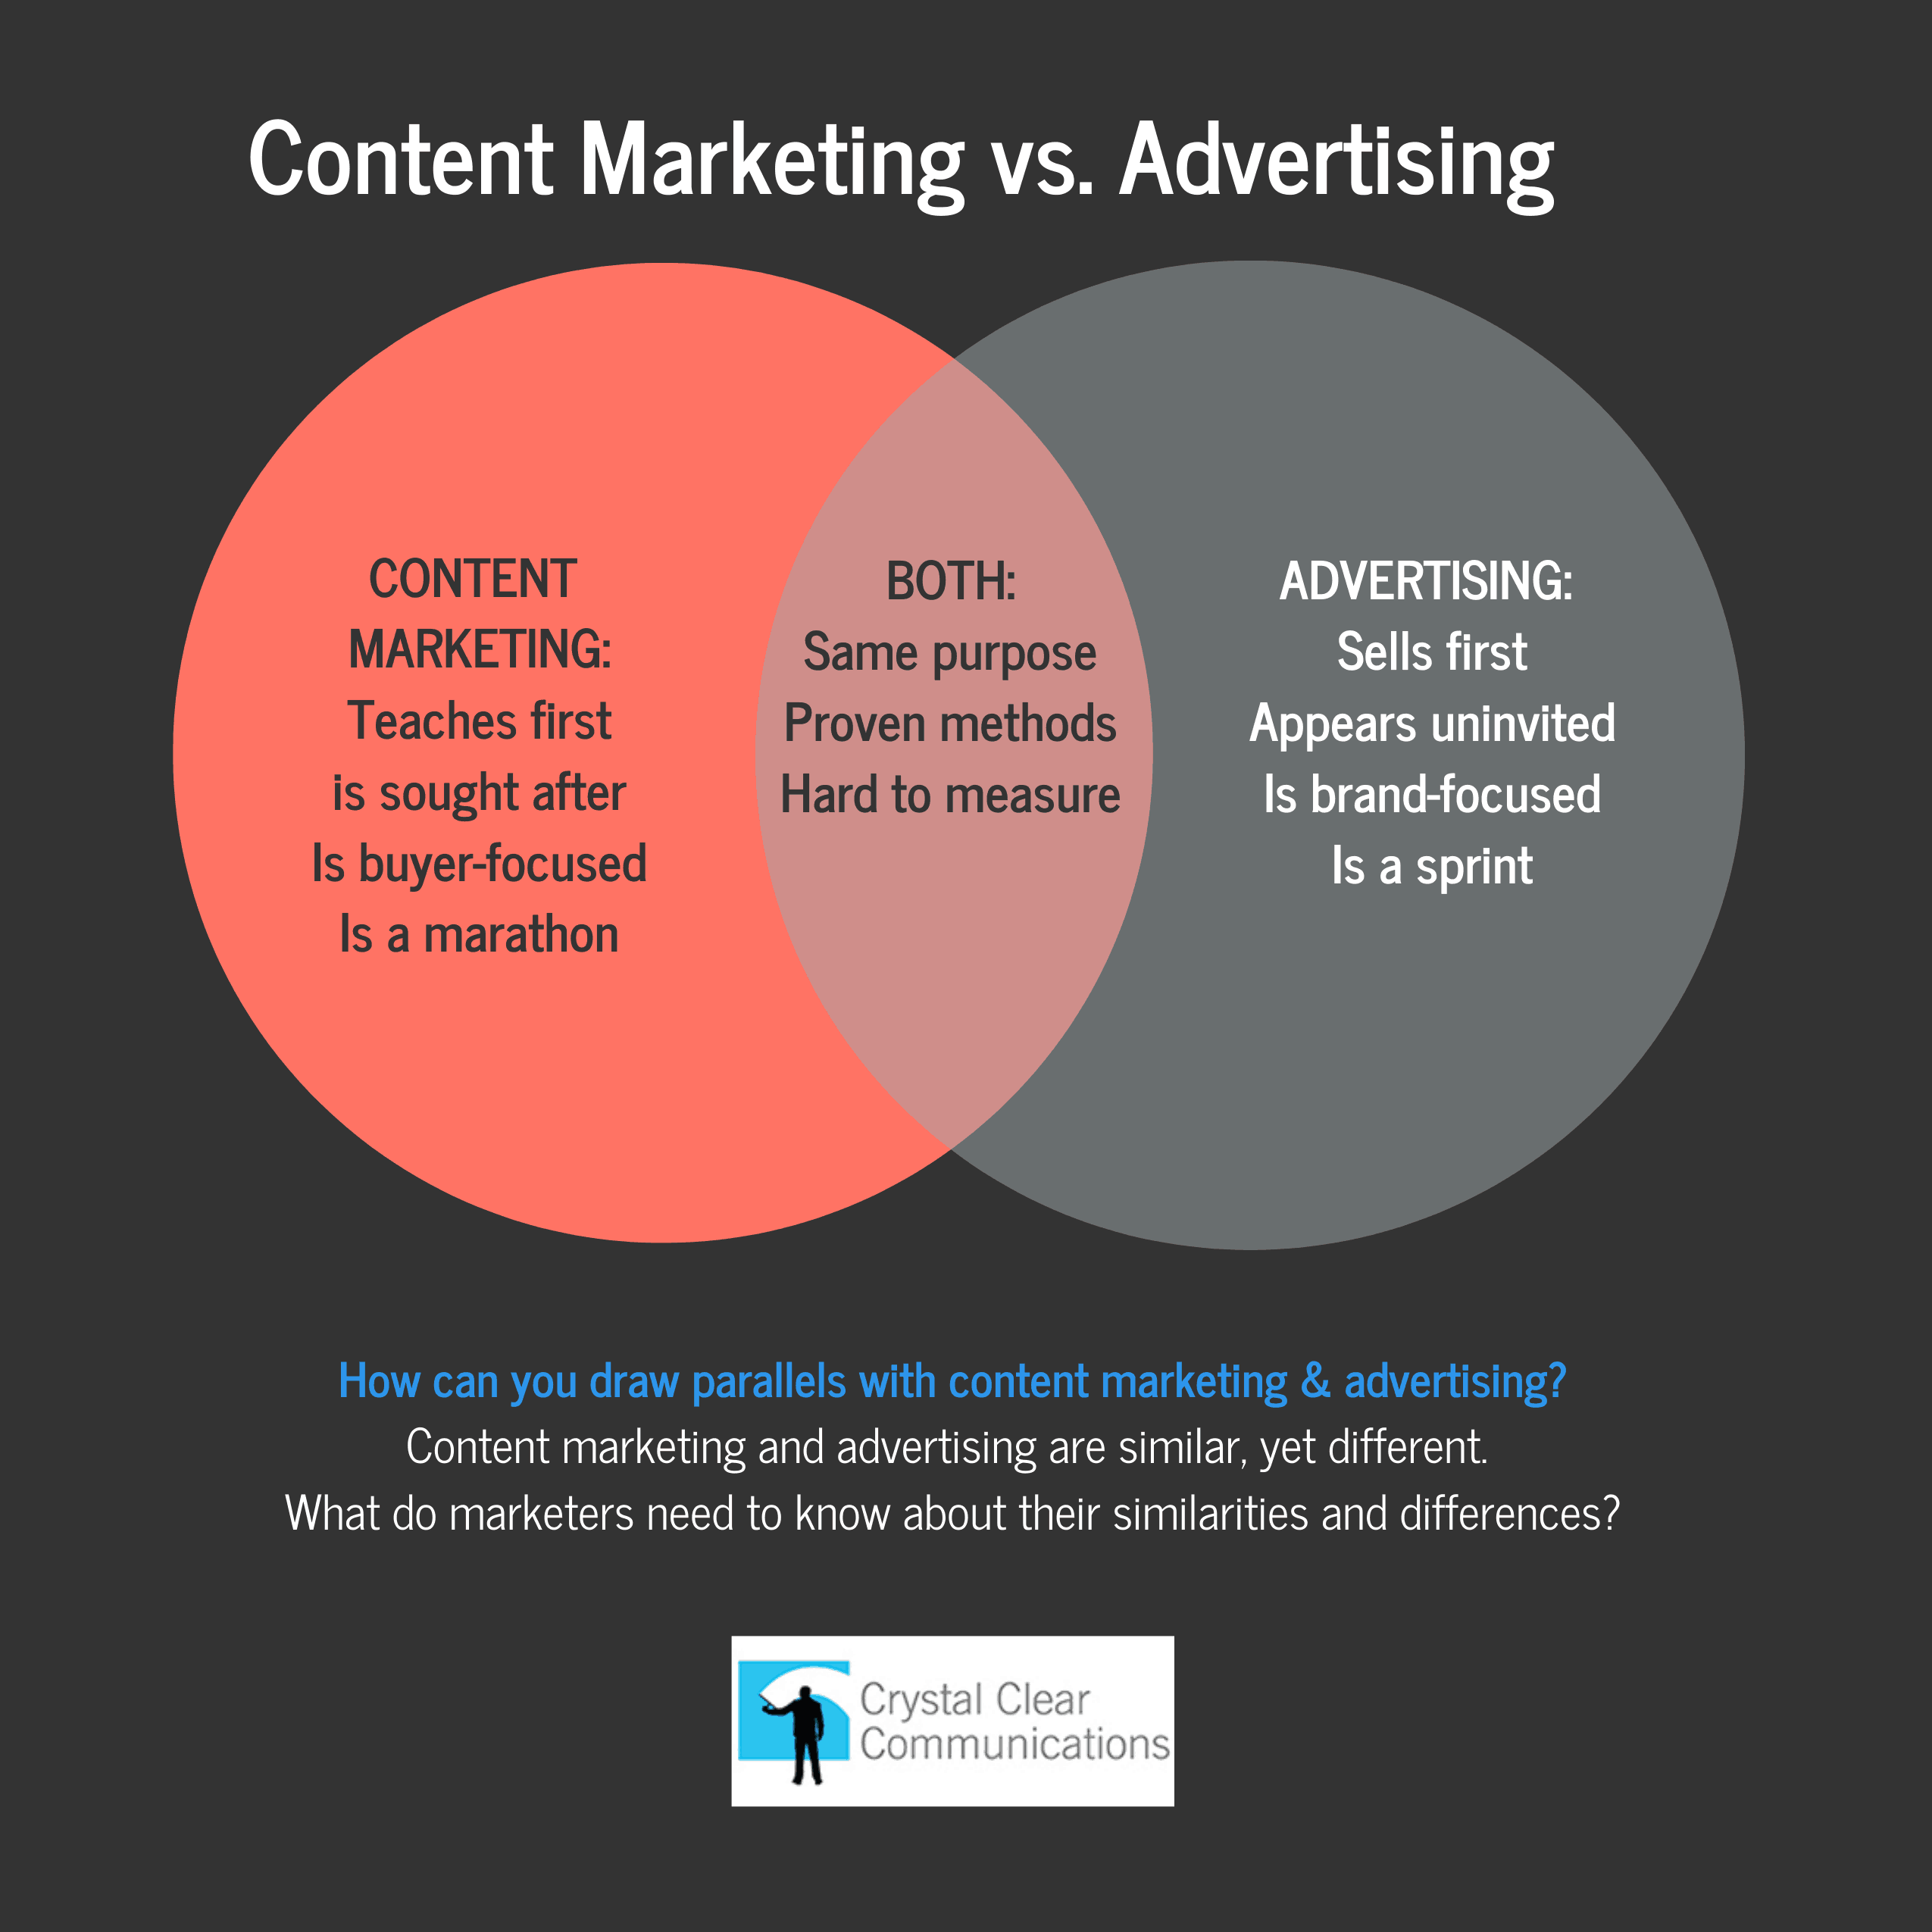 Is advertising part of content marketing?